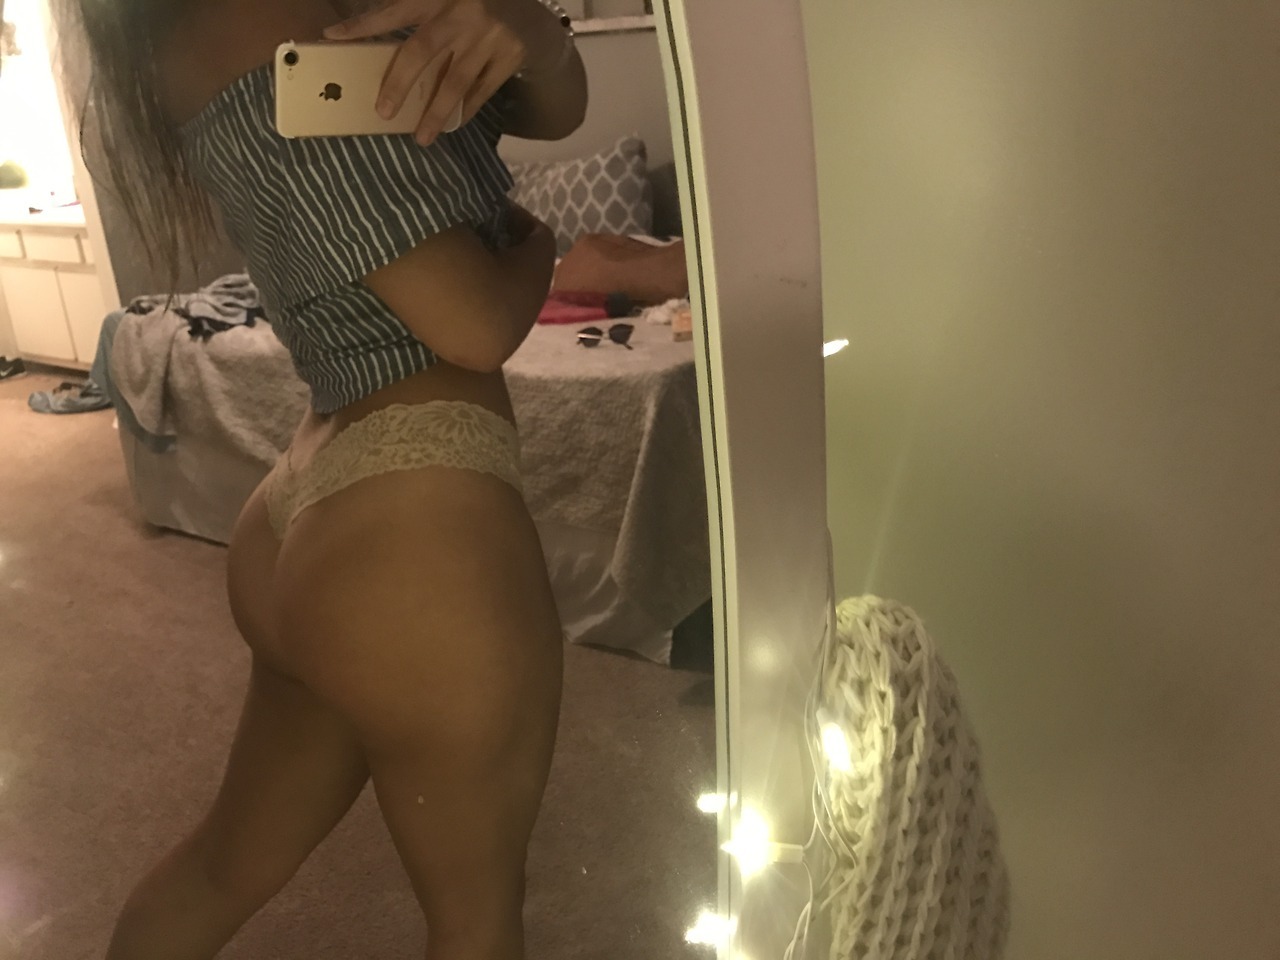 Facebook. here’s some booty gains for y'all and since my ex is lurking...